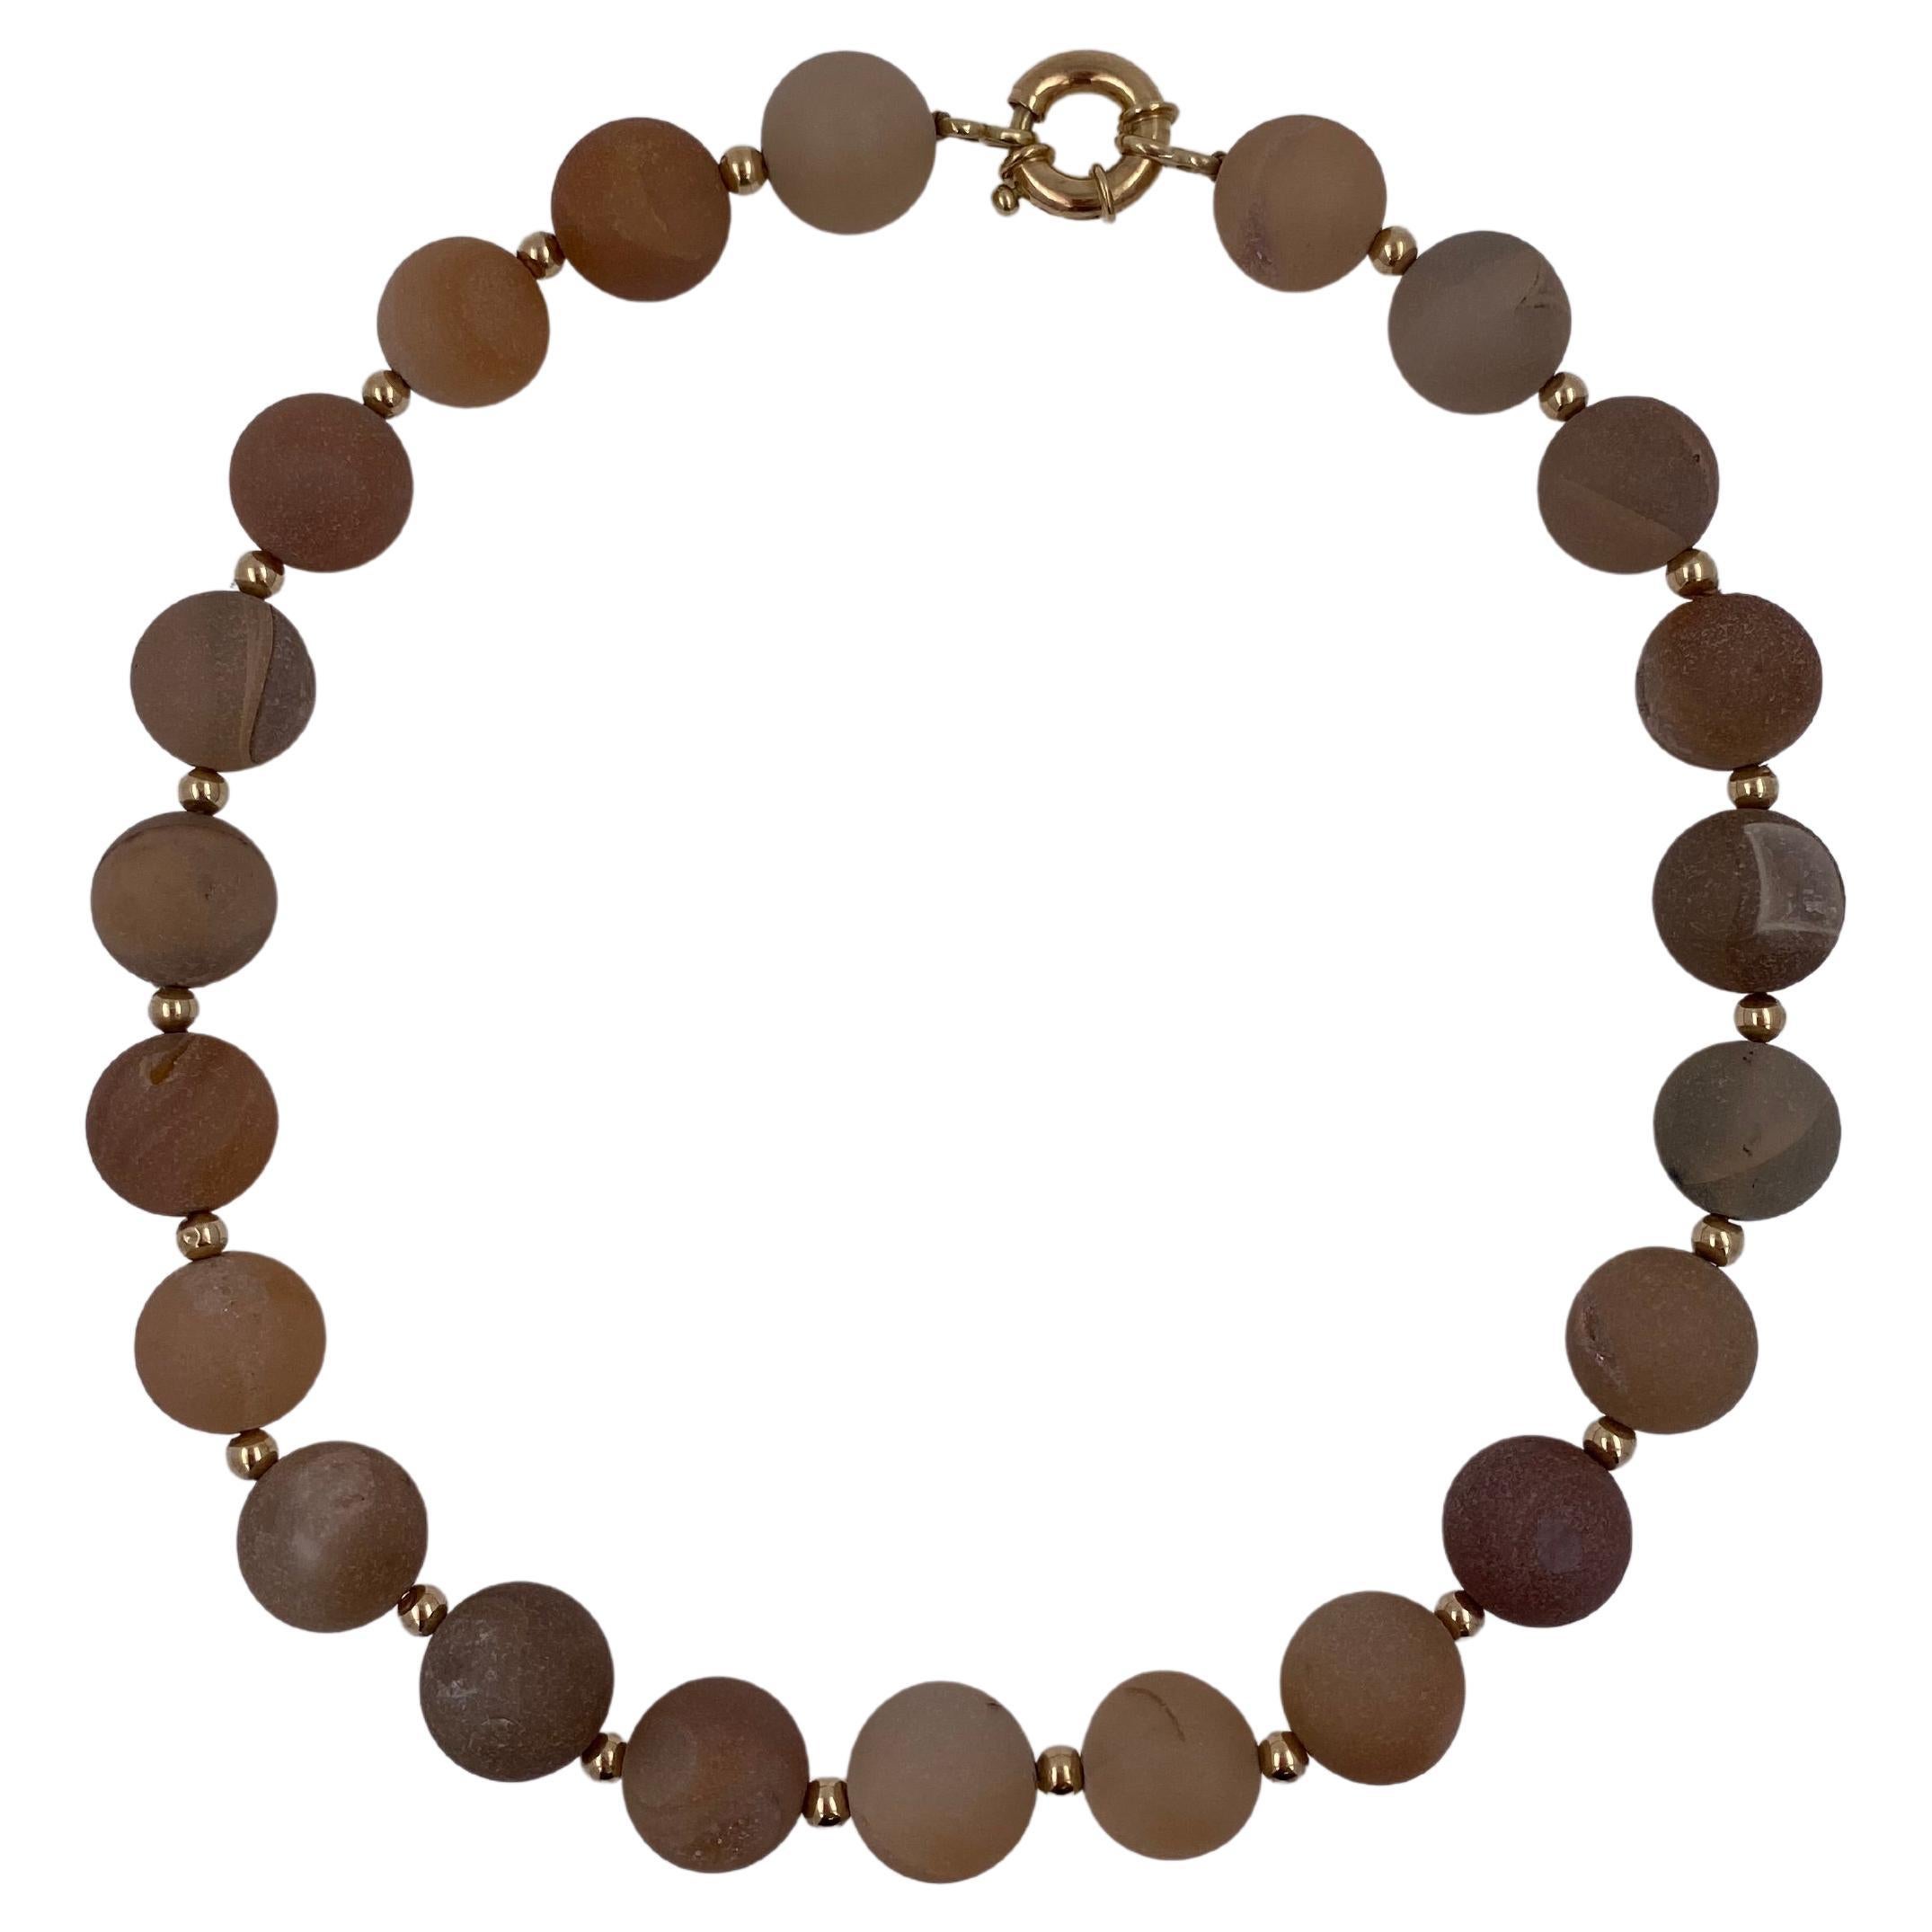 Natural Brown Pink Rutilated Quartz Round Circle Sphere Beads 14 Karat Yellow Gold Bead Short Pretty Versatile Gemstone Necklace
14 Karat Yellow Gold Beads + Solid Gold Clasp 
16.5 Inches Length 
Genuine Rutilated Quartz Round Circle Spheres
The